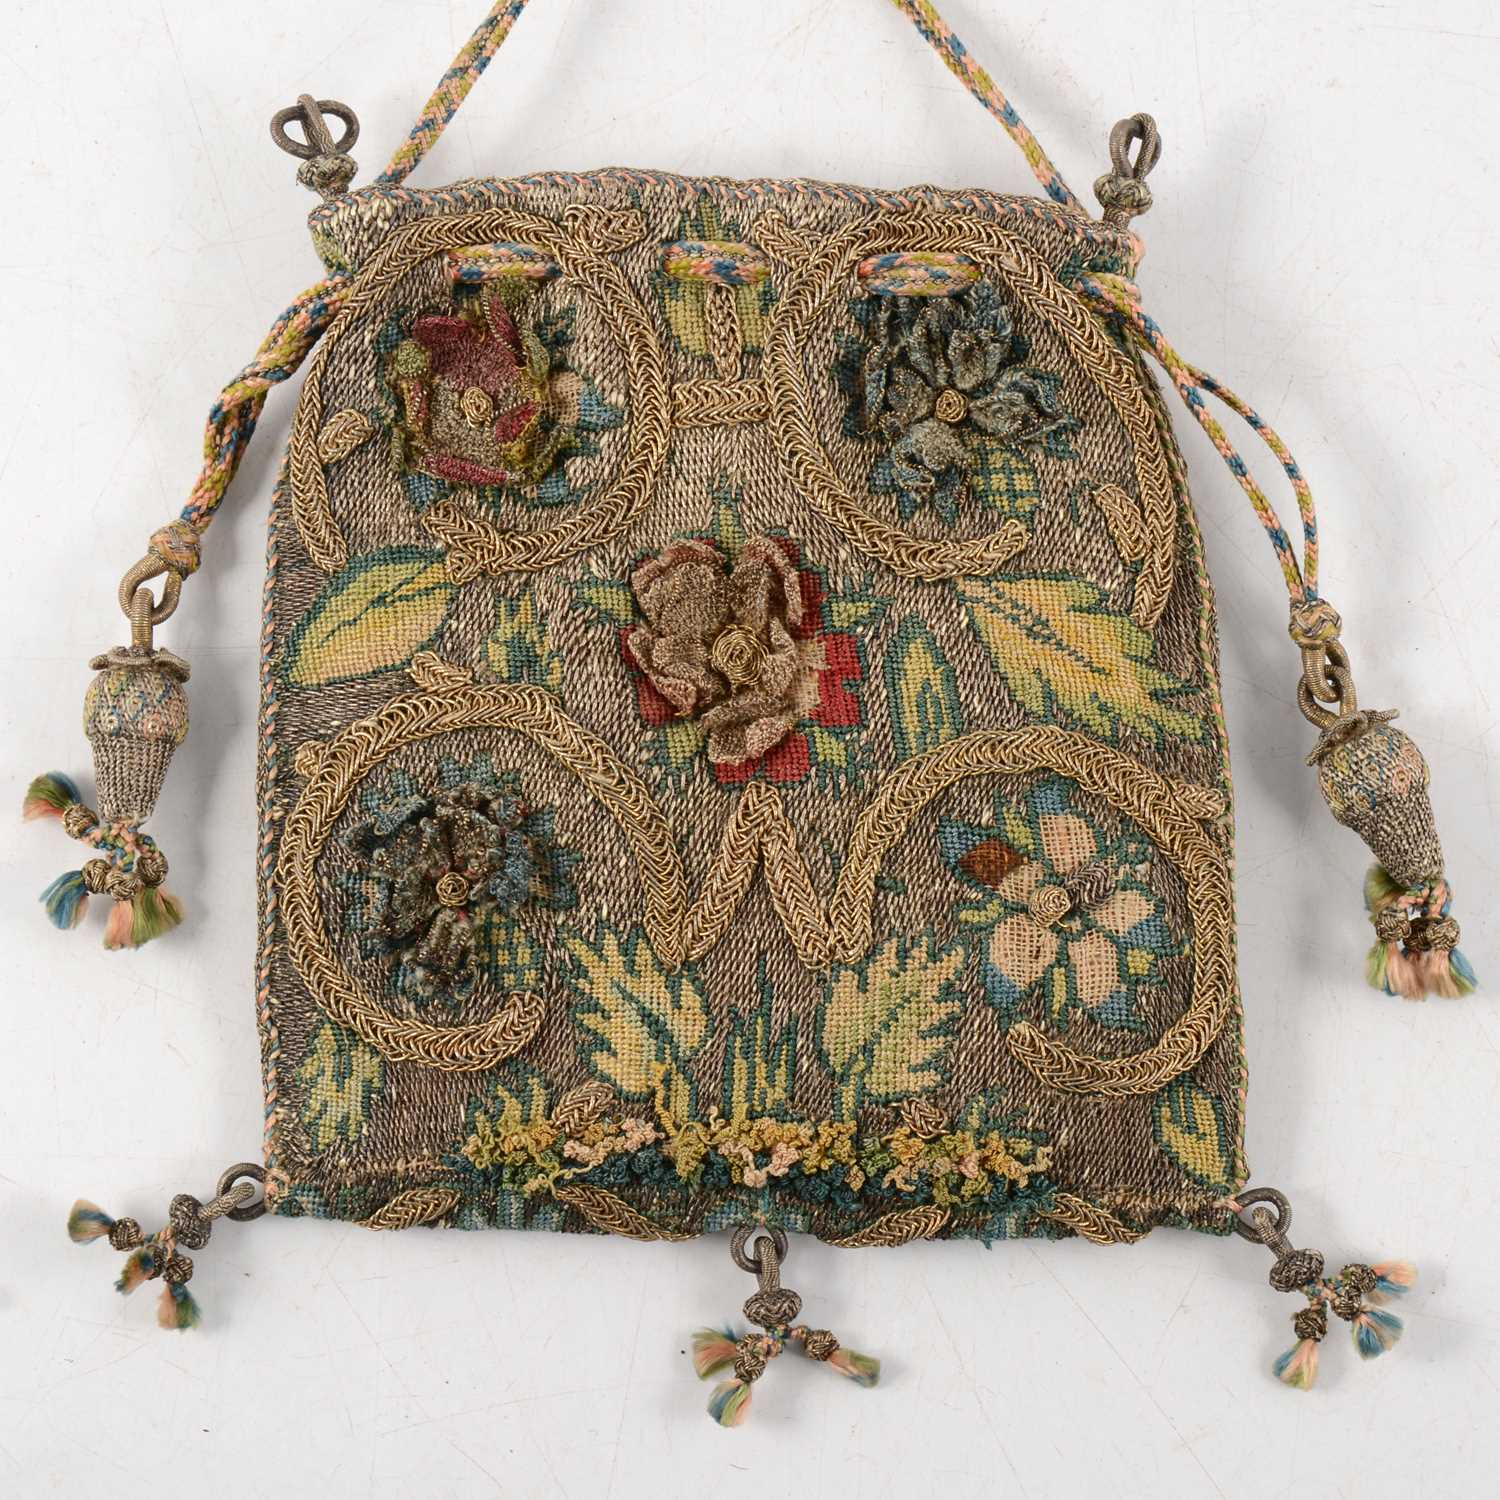 Lot 156 - A needlework purse, probably 17th Century